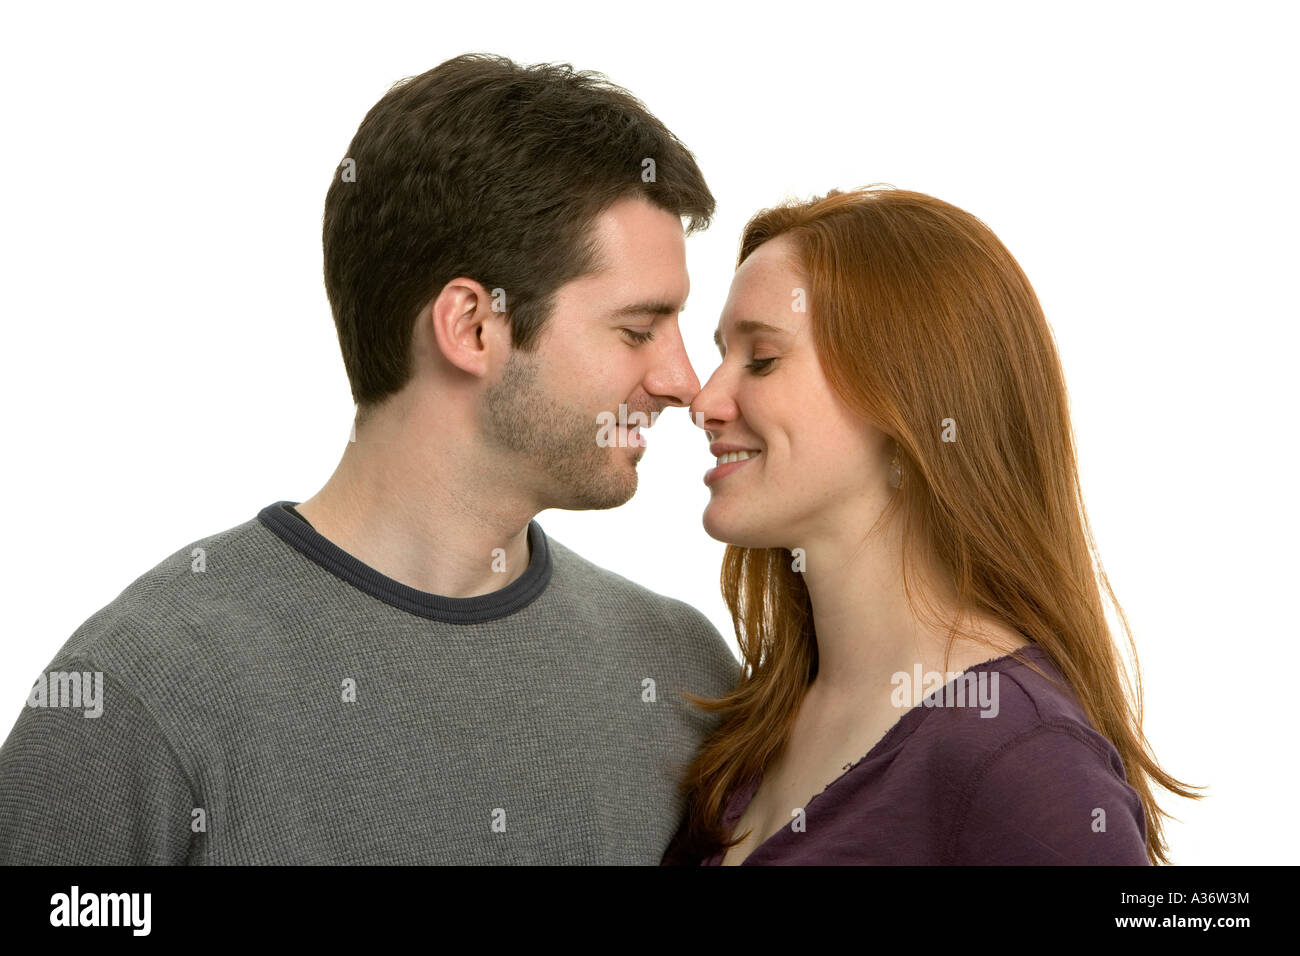 Happy young couple smiling and sharing a secret in a private moment Stock Photo